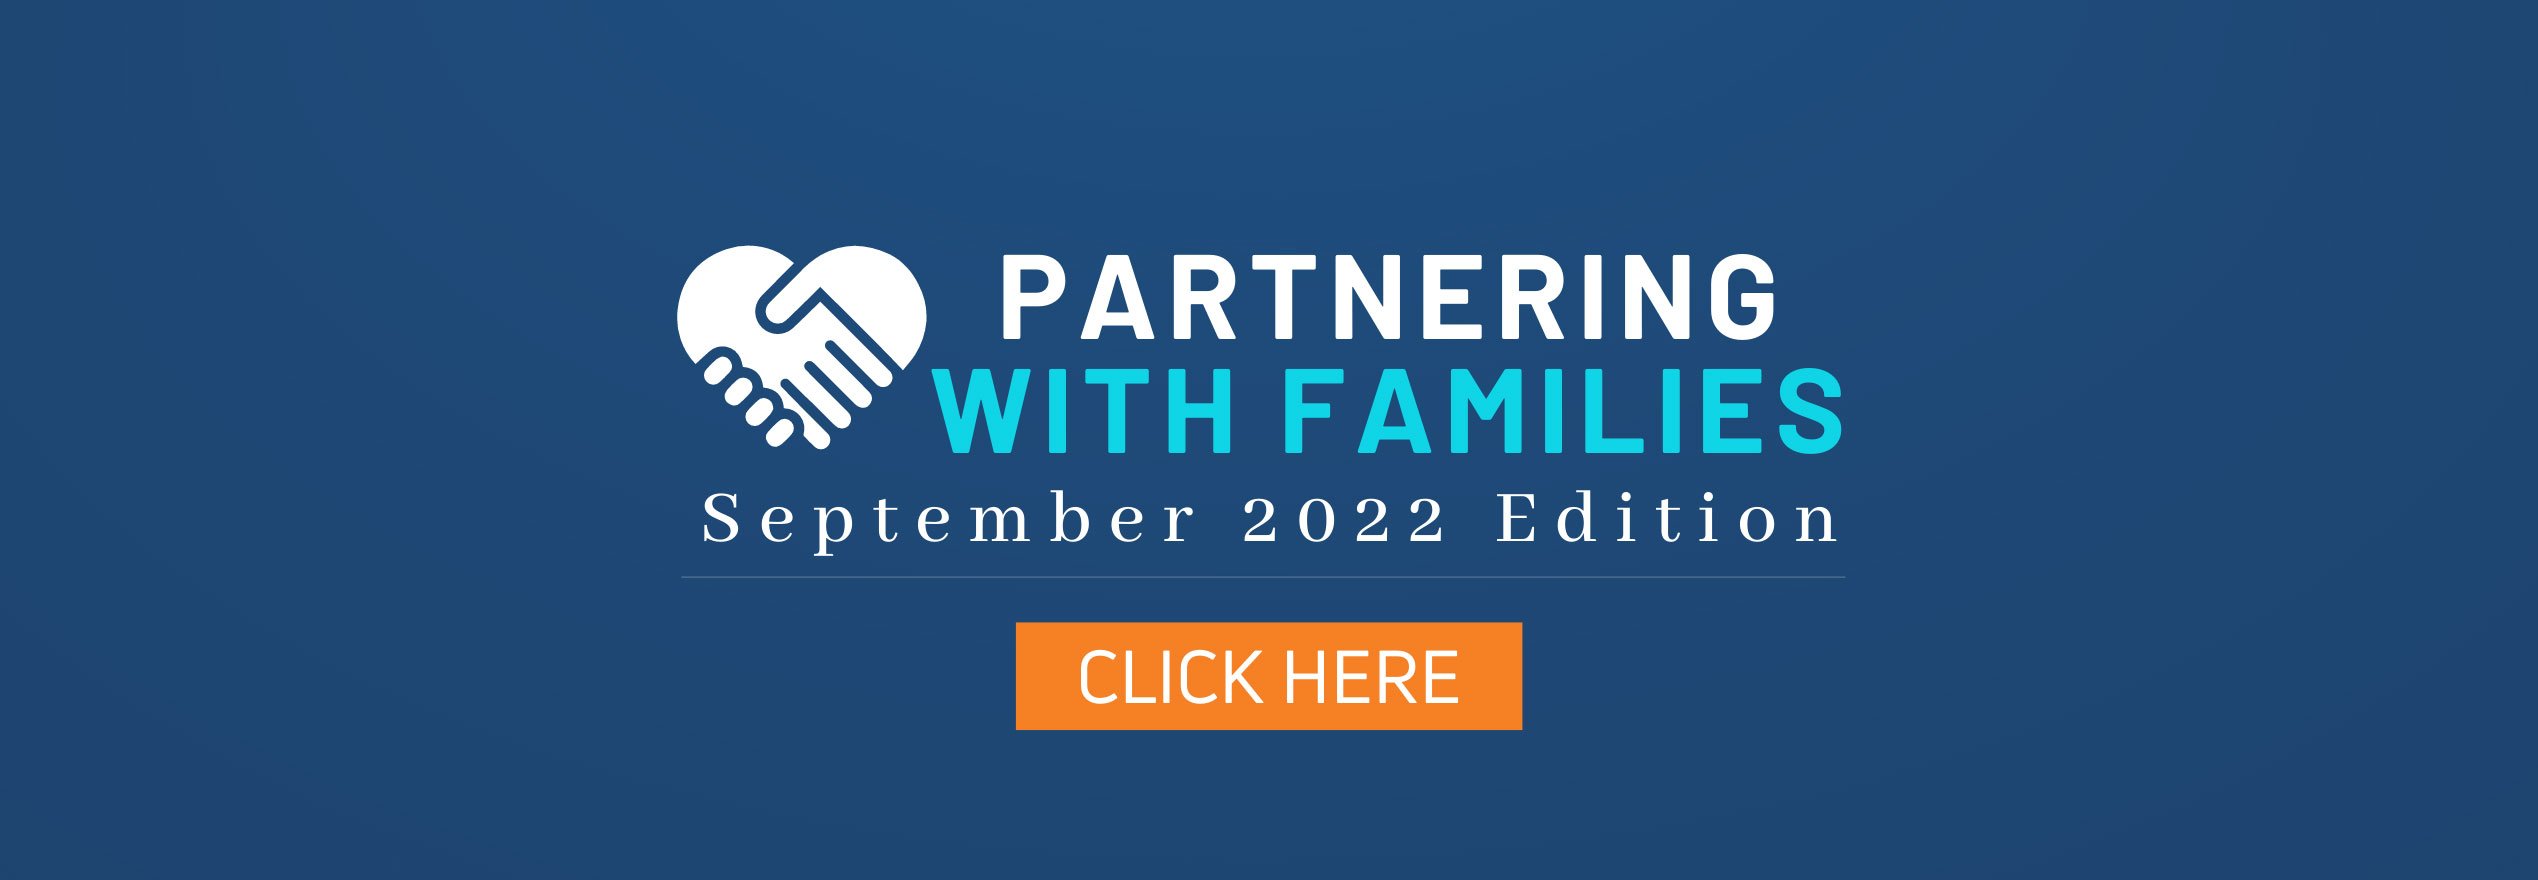 Partnering With Families